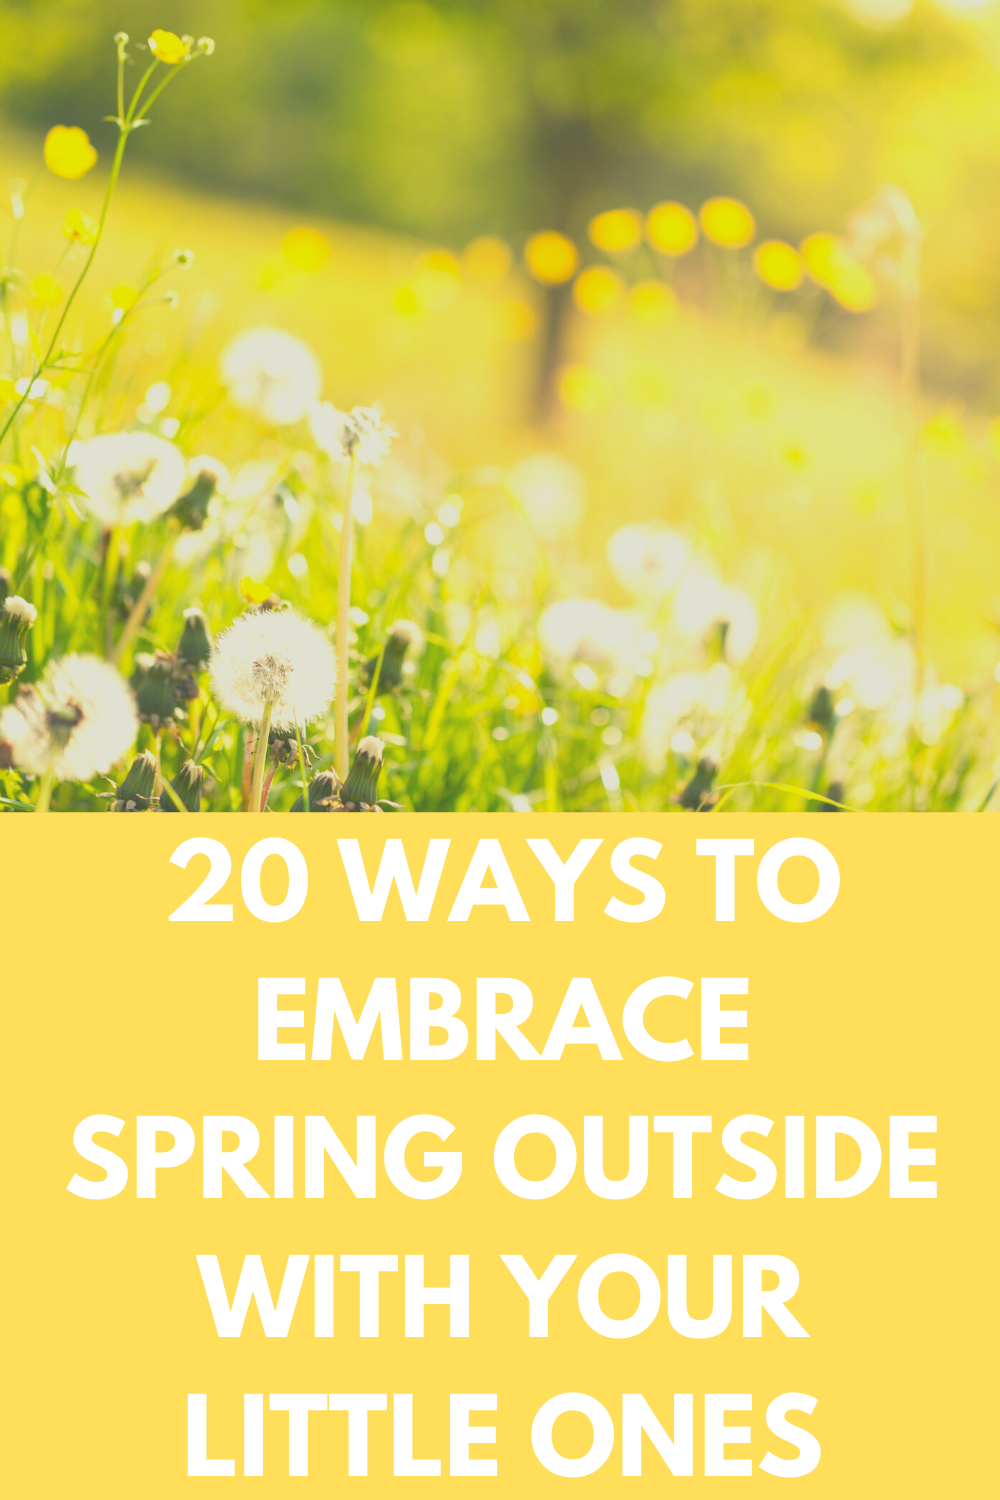 20 Ways To Embrace Spring Outside With Your Little Ones